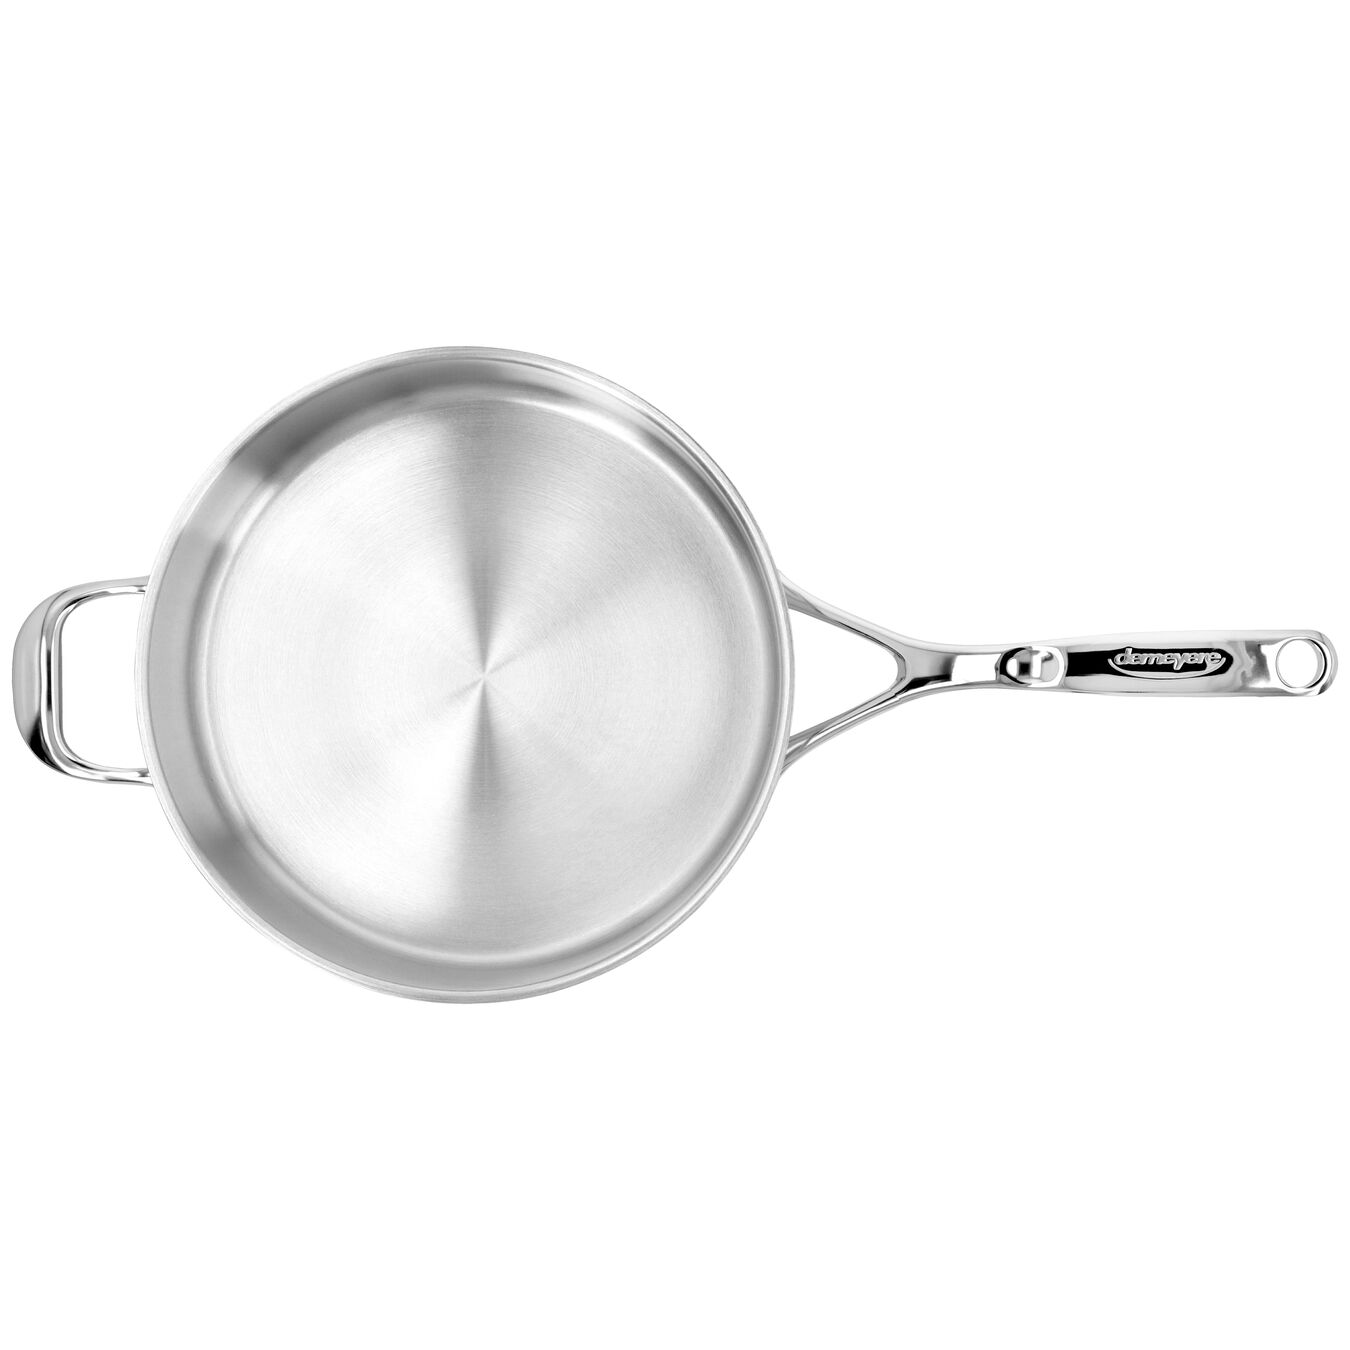 11-inch Sauté Pan with Helper Handle and Lid, 18/10 Stainless Steel ,,large 5